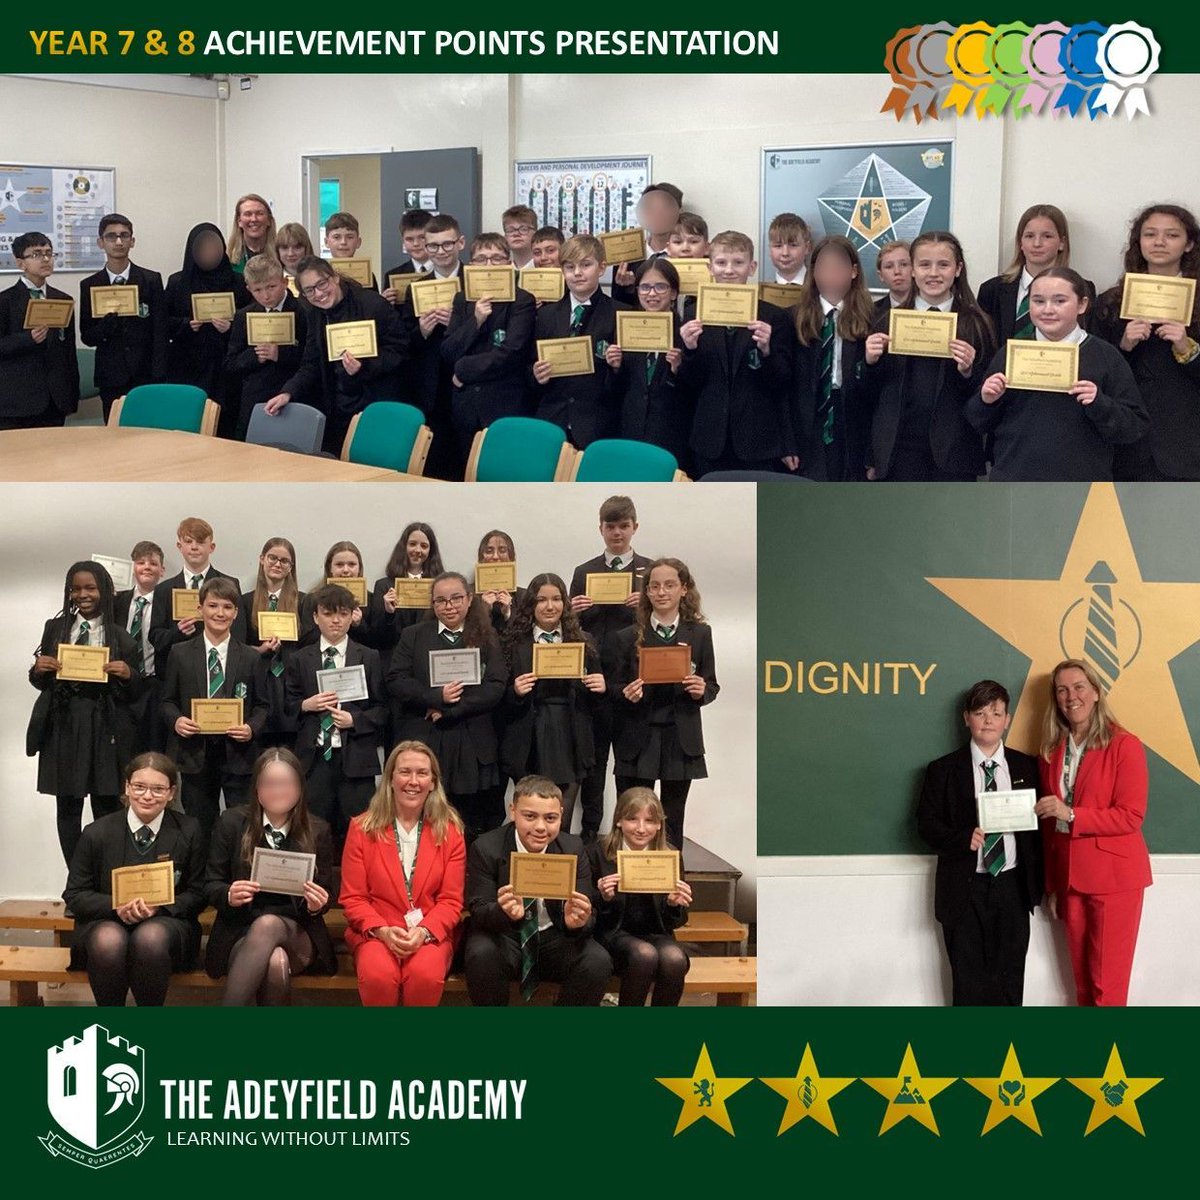 Congratulations to the students who have been presented with their next Achievement certificate. We are proud to announce that two students have now reached 'Emerald' level, an incredible accomplishment. We look forward to awarding more of our #5starstudents in the days ahead.